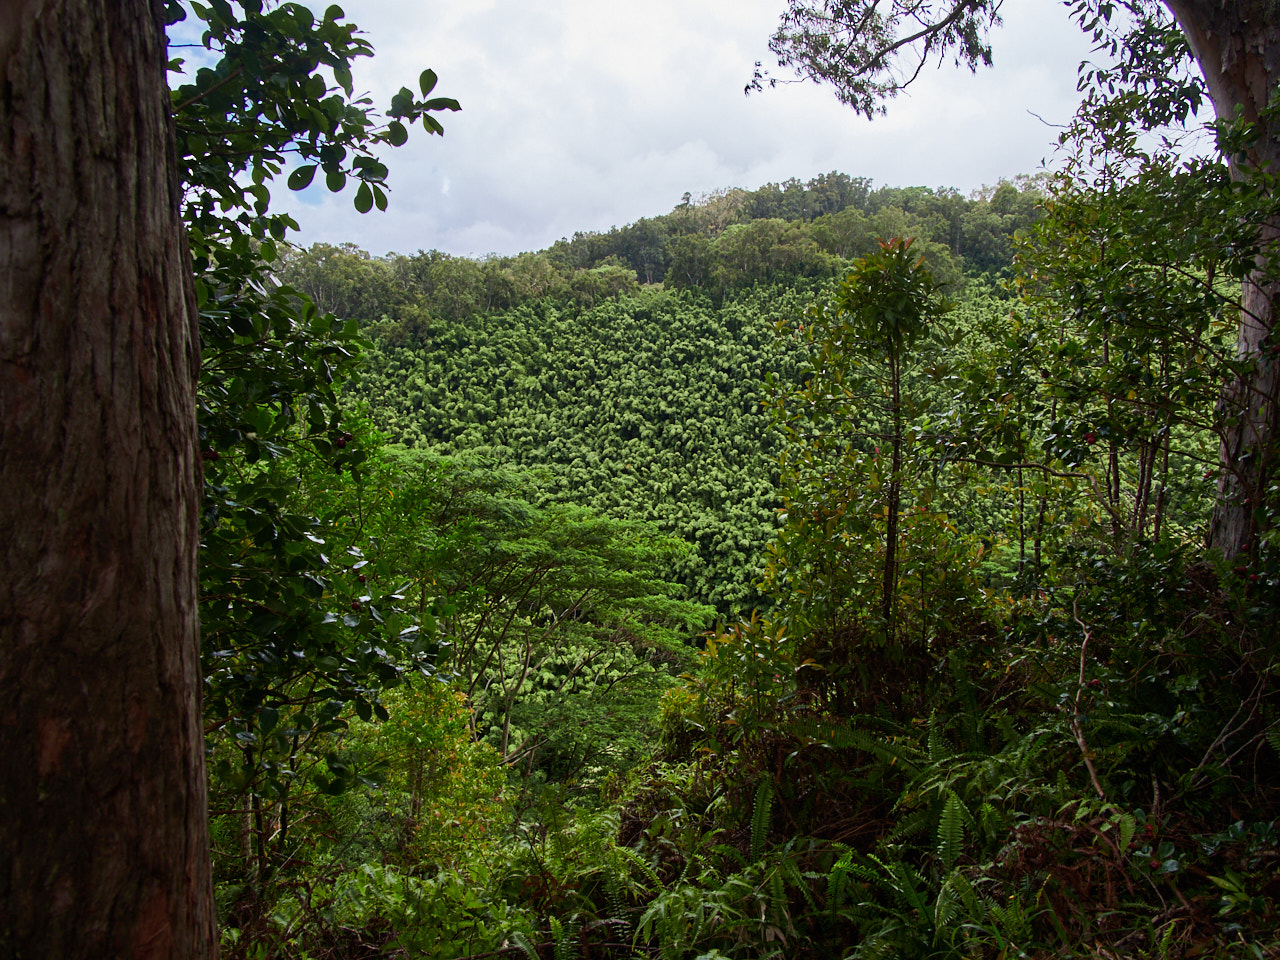 The views that do exist are of lush, tropical forests.